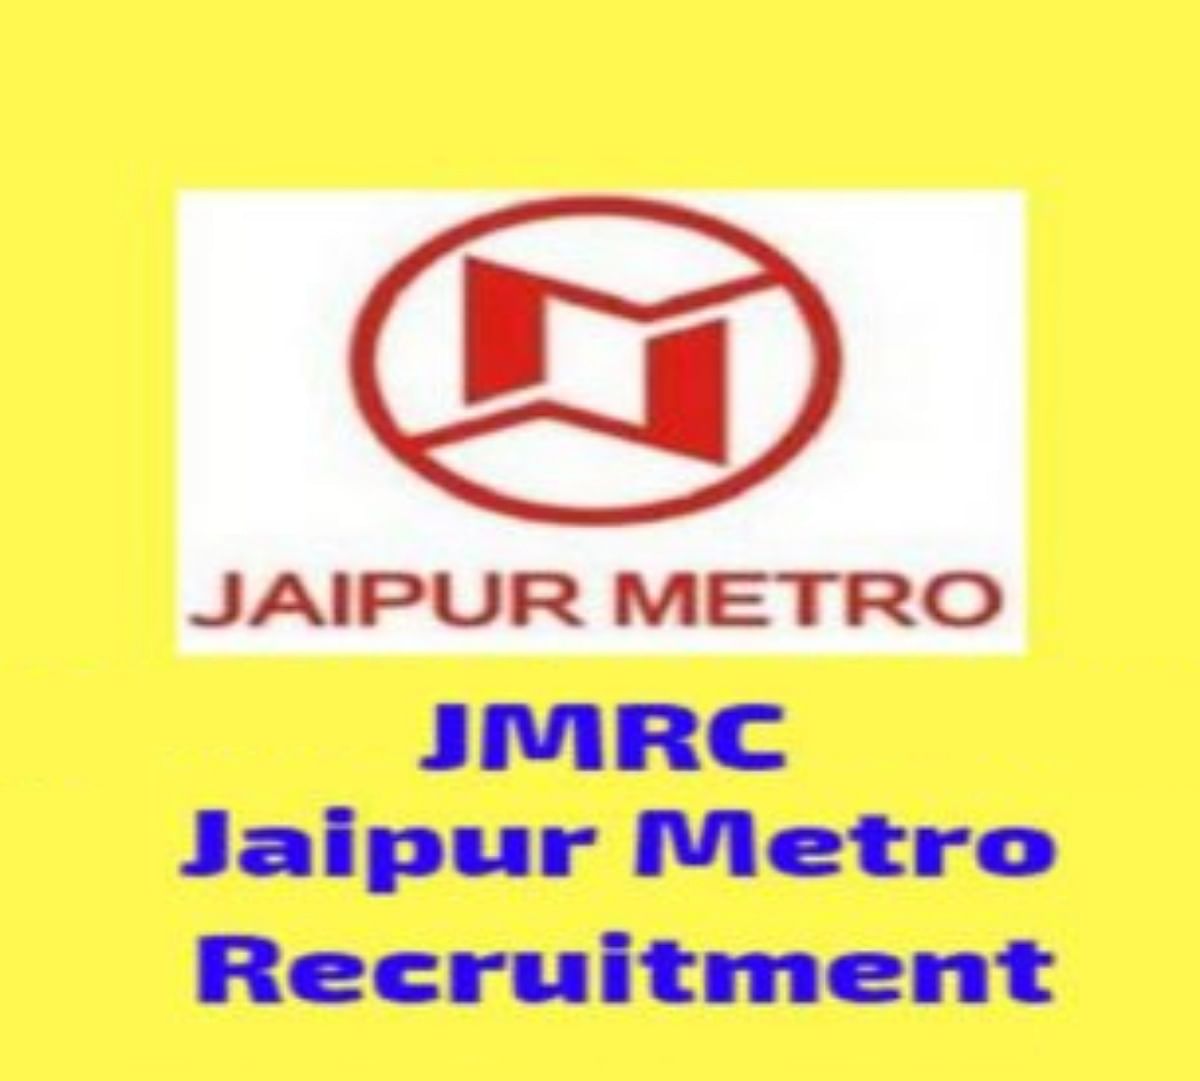 Jaipur Metro Recruitment Process to Conclude in 2 Days for Various Posts, Check Salary Package